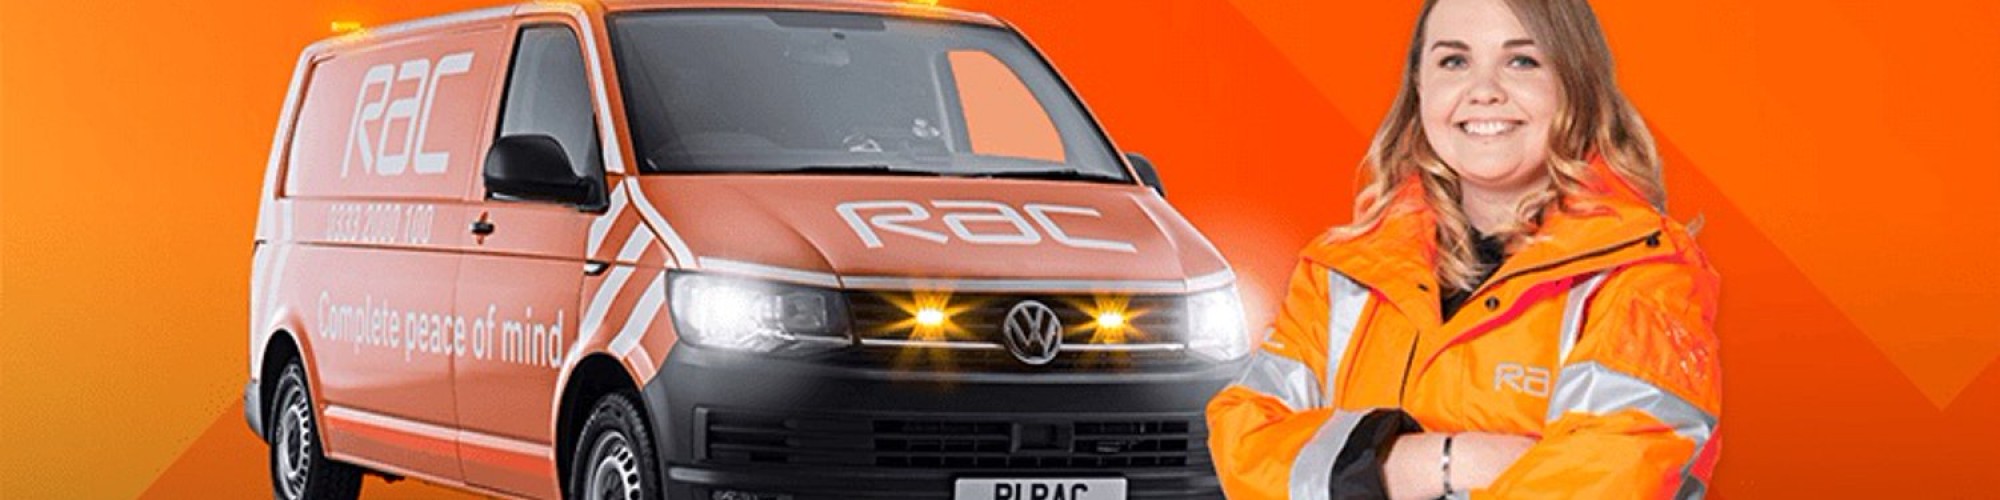 The RAC cover image